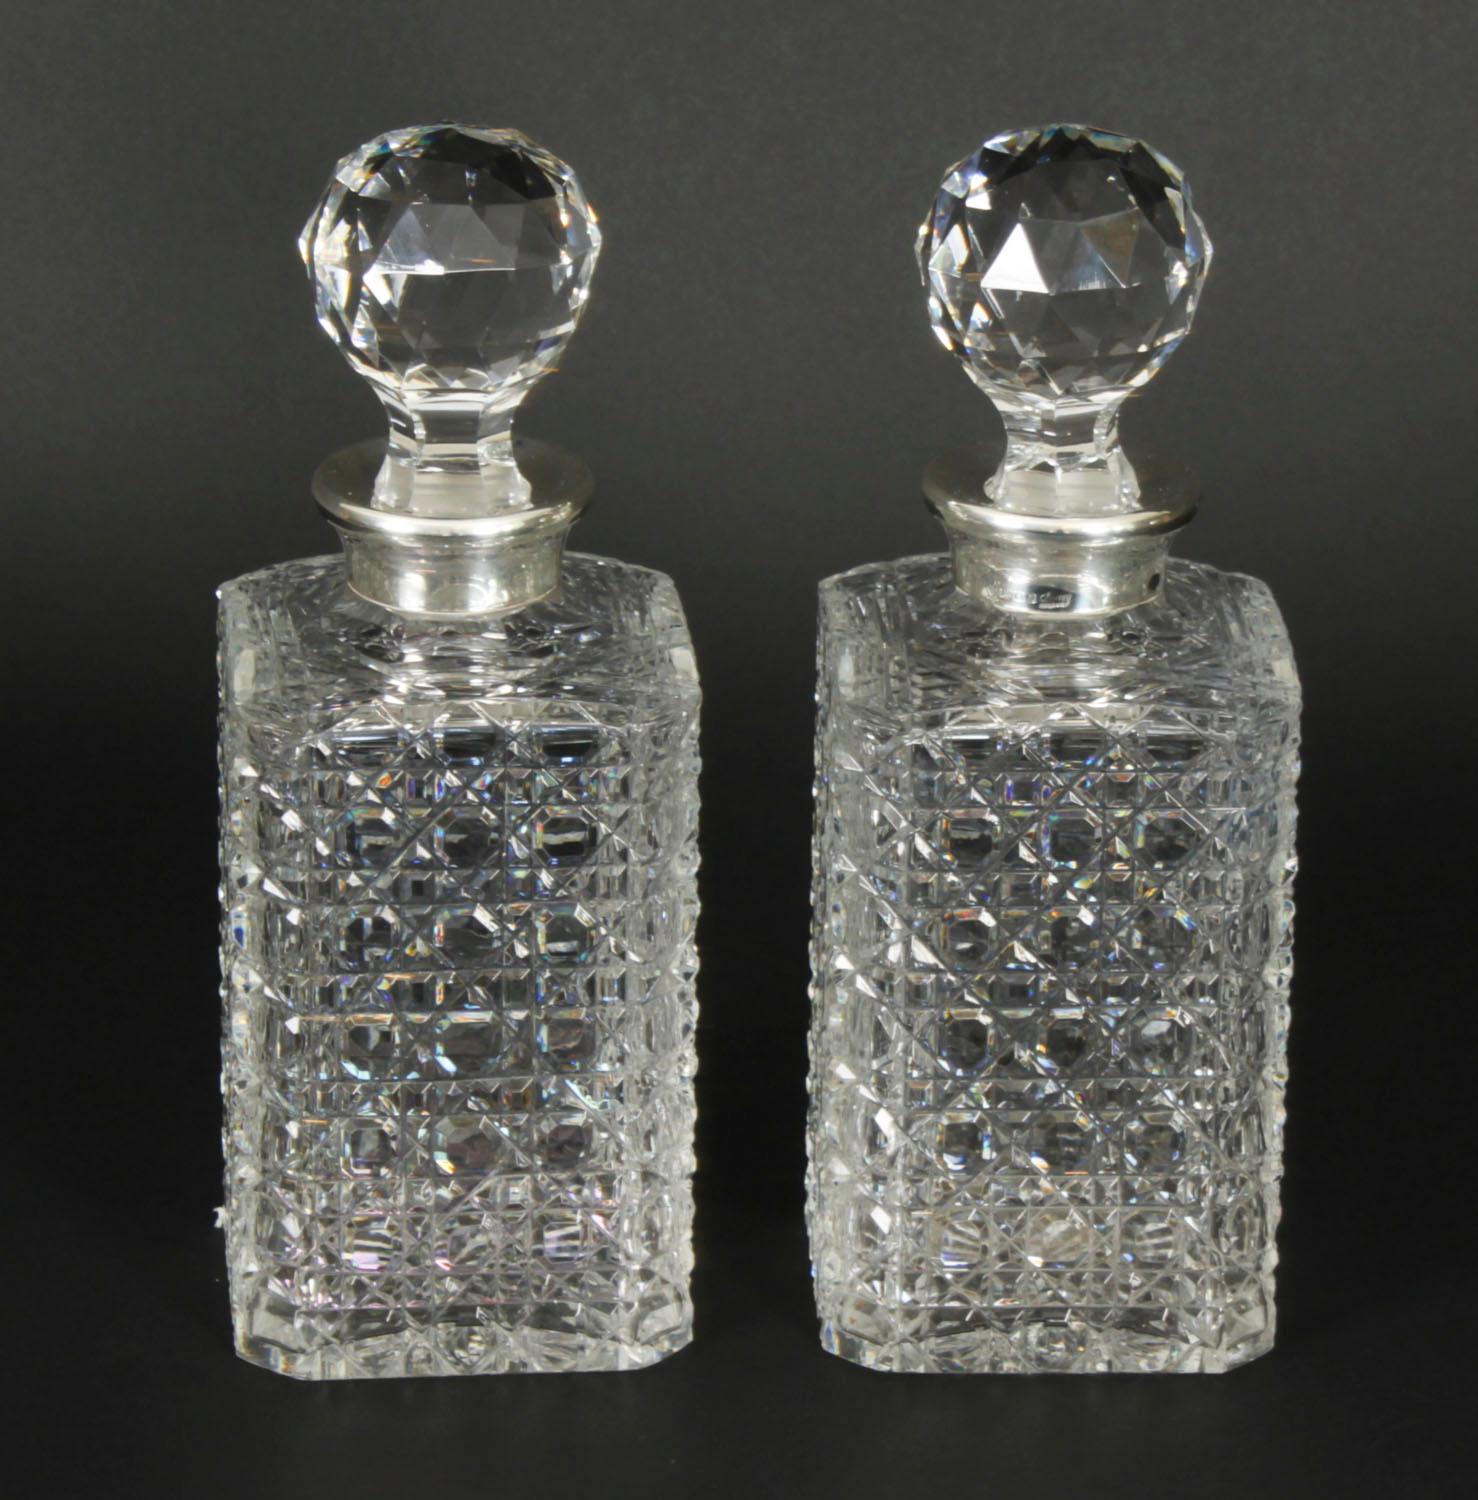 A superb pair of vintage sterling silver mounted hobnail-cut crystal square decanters and stoppers, with halllmarks  for London, 1982 and the makers mark of the world renowned Bond Street retailer Asprey & Co Ltd

The square hobnail-cut crystal